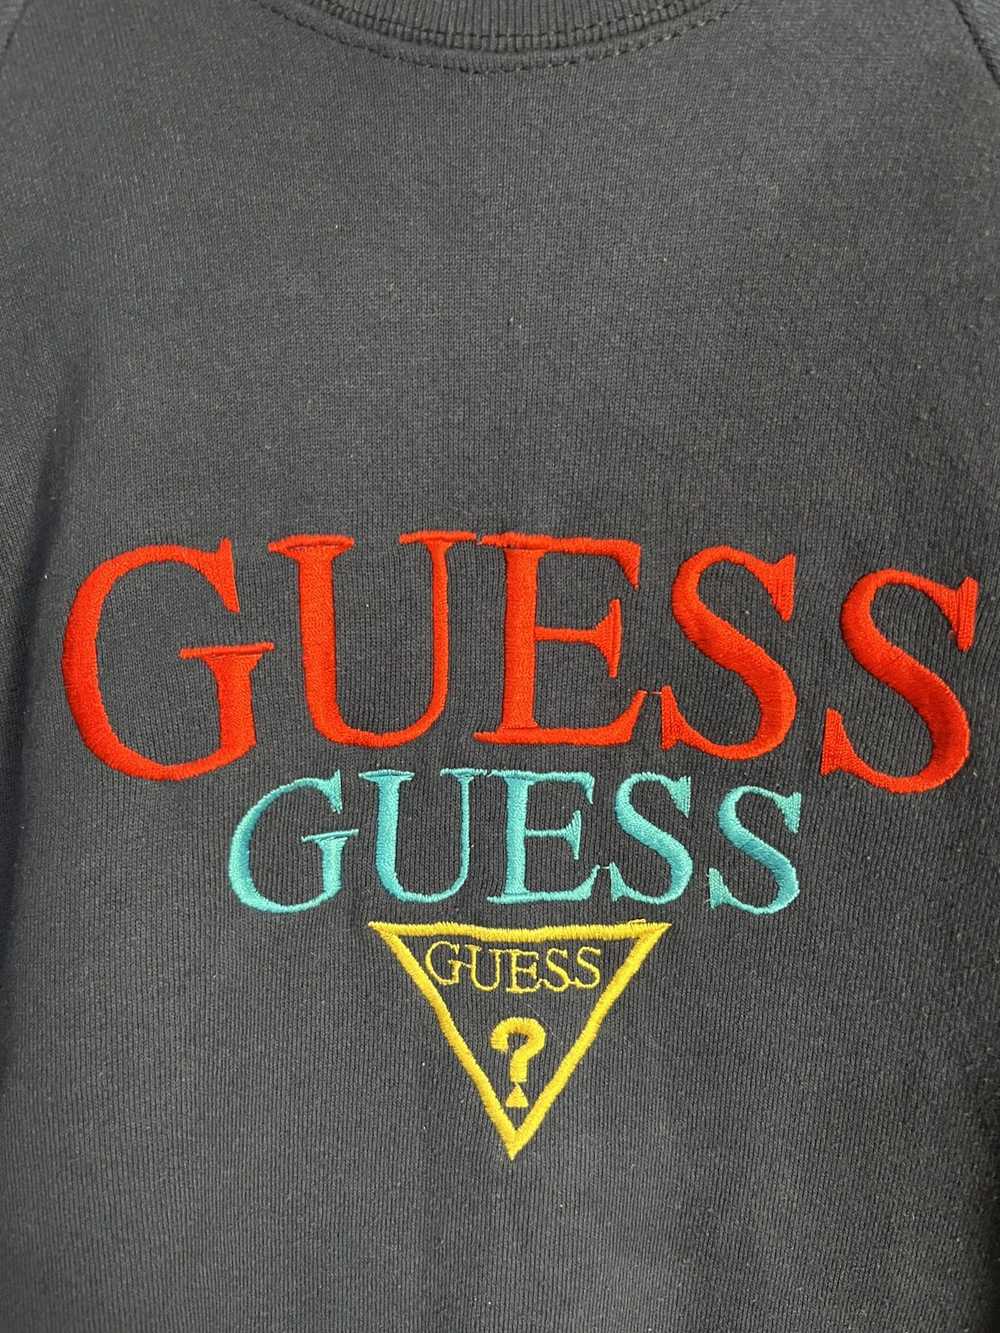 Georges Marciano × Guess × Vintage navy guess emb… - image 2